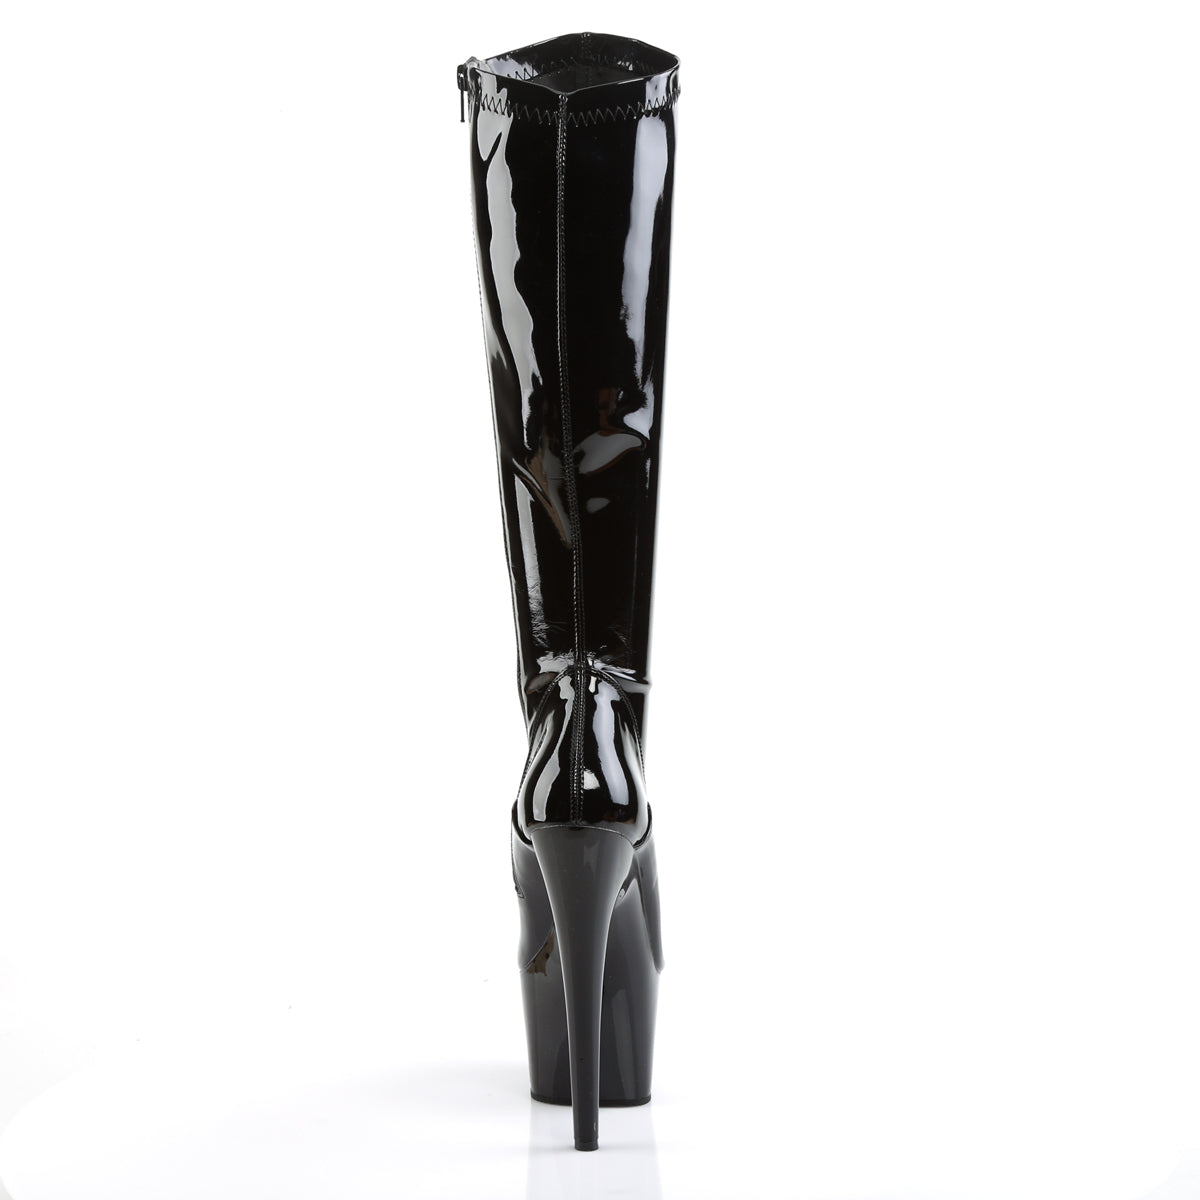 ADORE-2000 / B / M 7 "PLEASER FAST DELIVERY 24-48h 